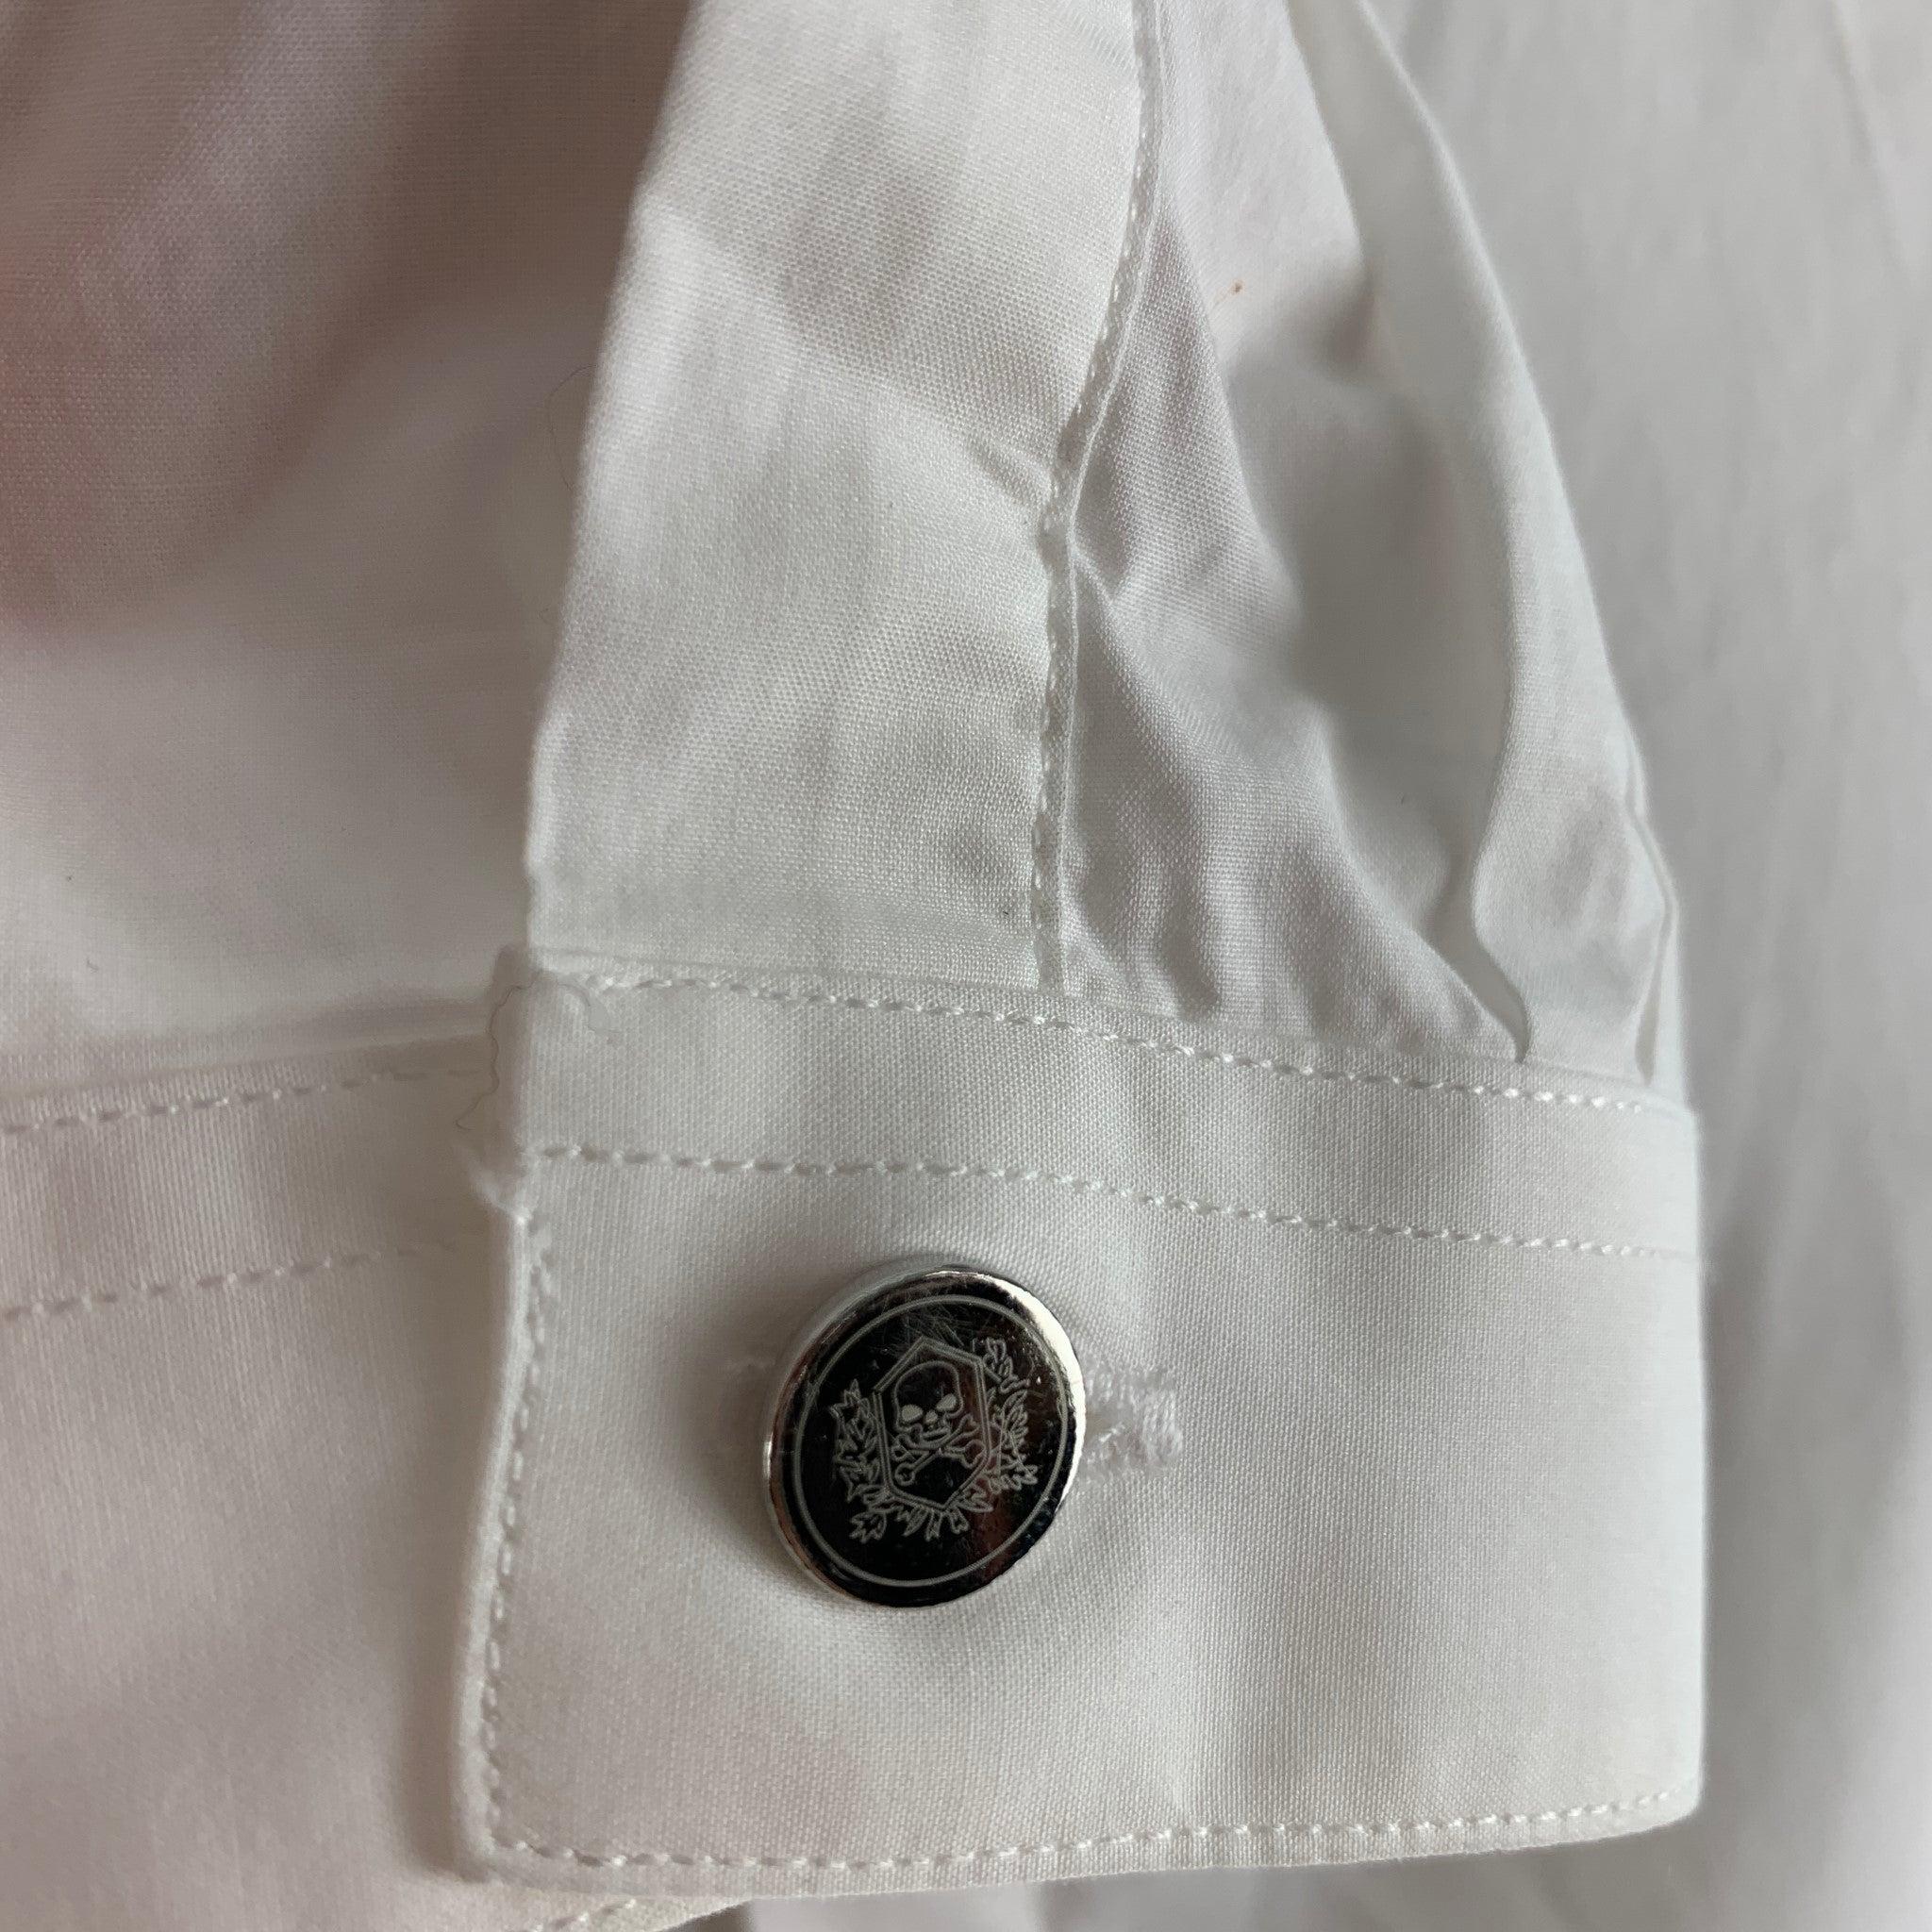 THE KOOPLES Size XL White Solid Cotton Button Up Long Sleeve Shirt In Good Condition For Sale In San Francisco, CA